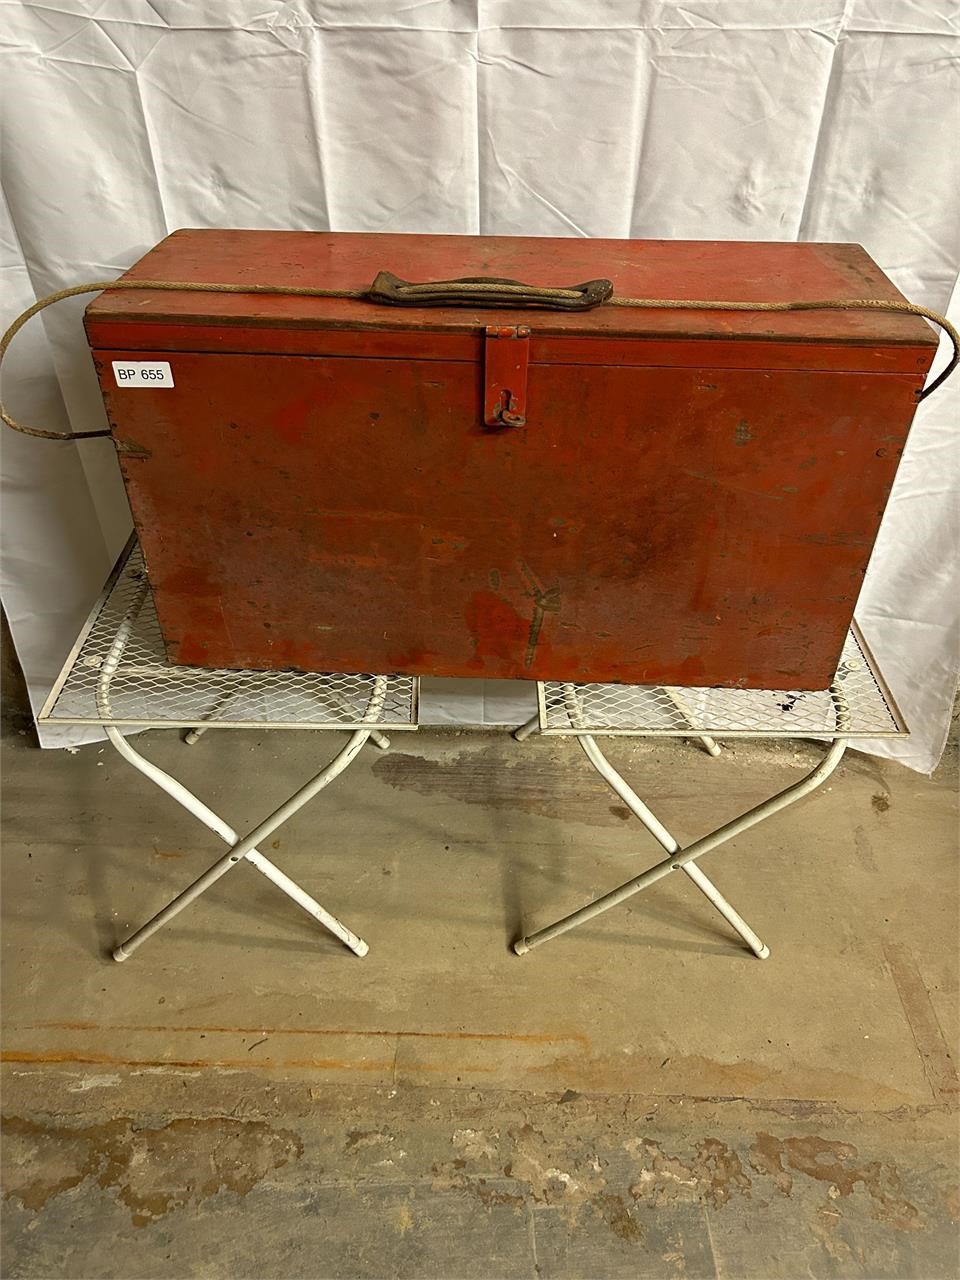 VTG Wooden Tackle/Tool Box w/ Fishing Items